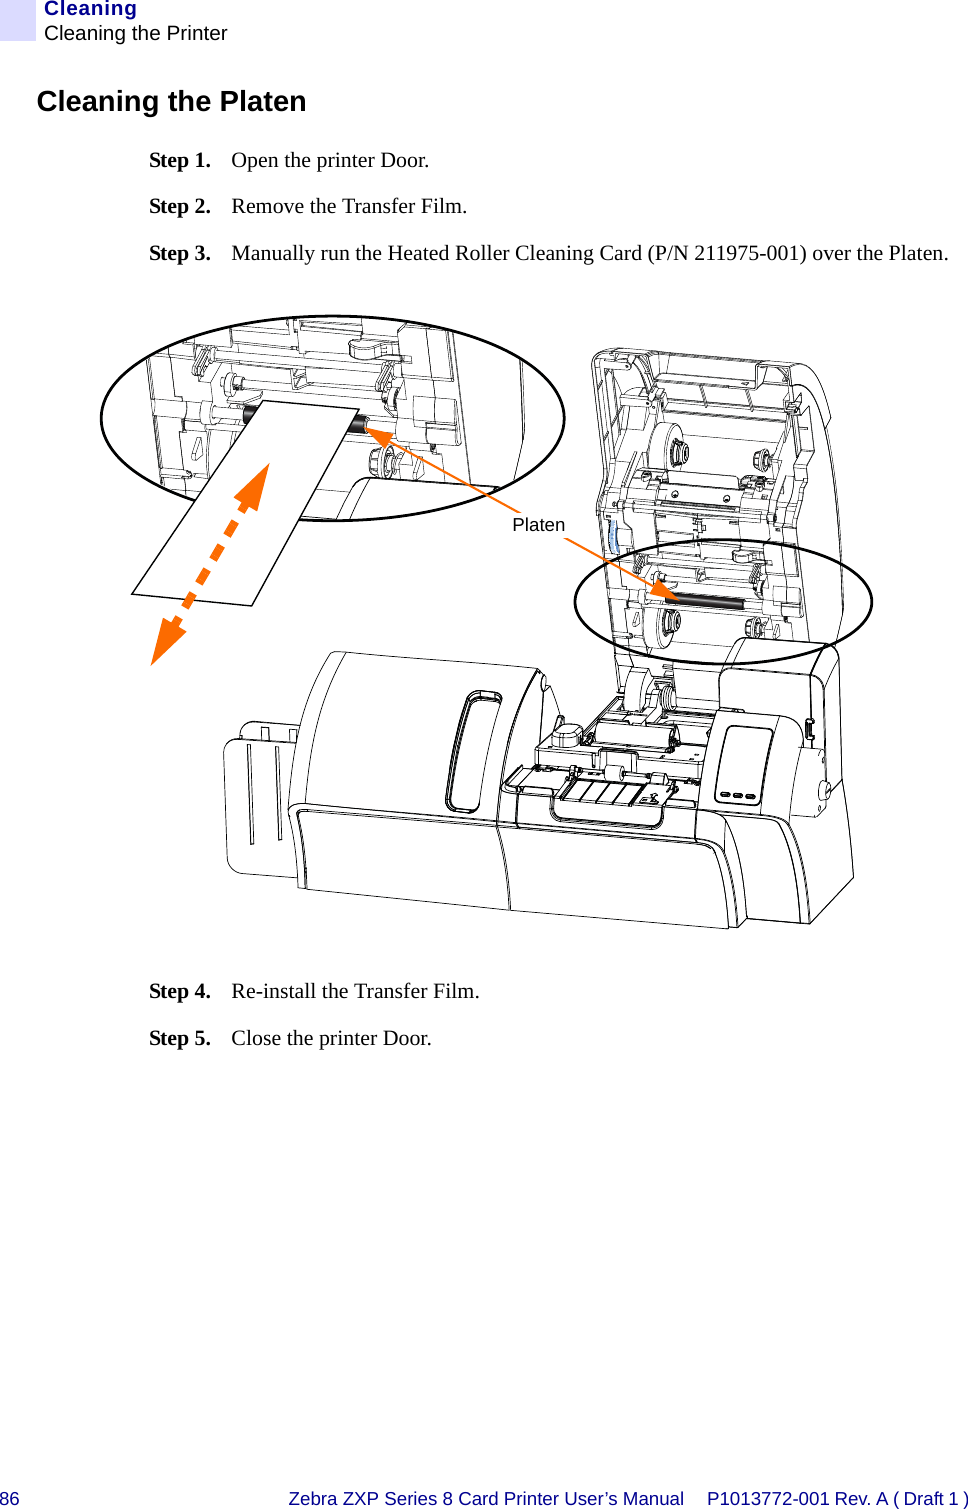 86 Zebra ZXP Series 8 Card Printer User’s Manual P1013772-001 Rev. A ( Draft 1 ) CleaningCleaning the PrinterCleaning the PlatenStep 1. Open the printer Door.Step 2. Remove the Transfer Film.Step 3. Manually run the Heated Roller Cleaning Card (P/N 211975-001) over the Platen.Step 4. Re-install the Transfer Film.Step 5. Close the printer Door.Platen